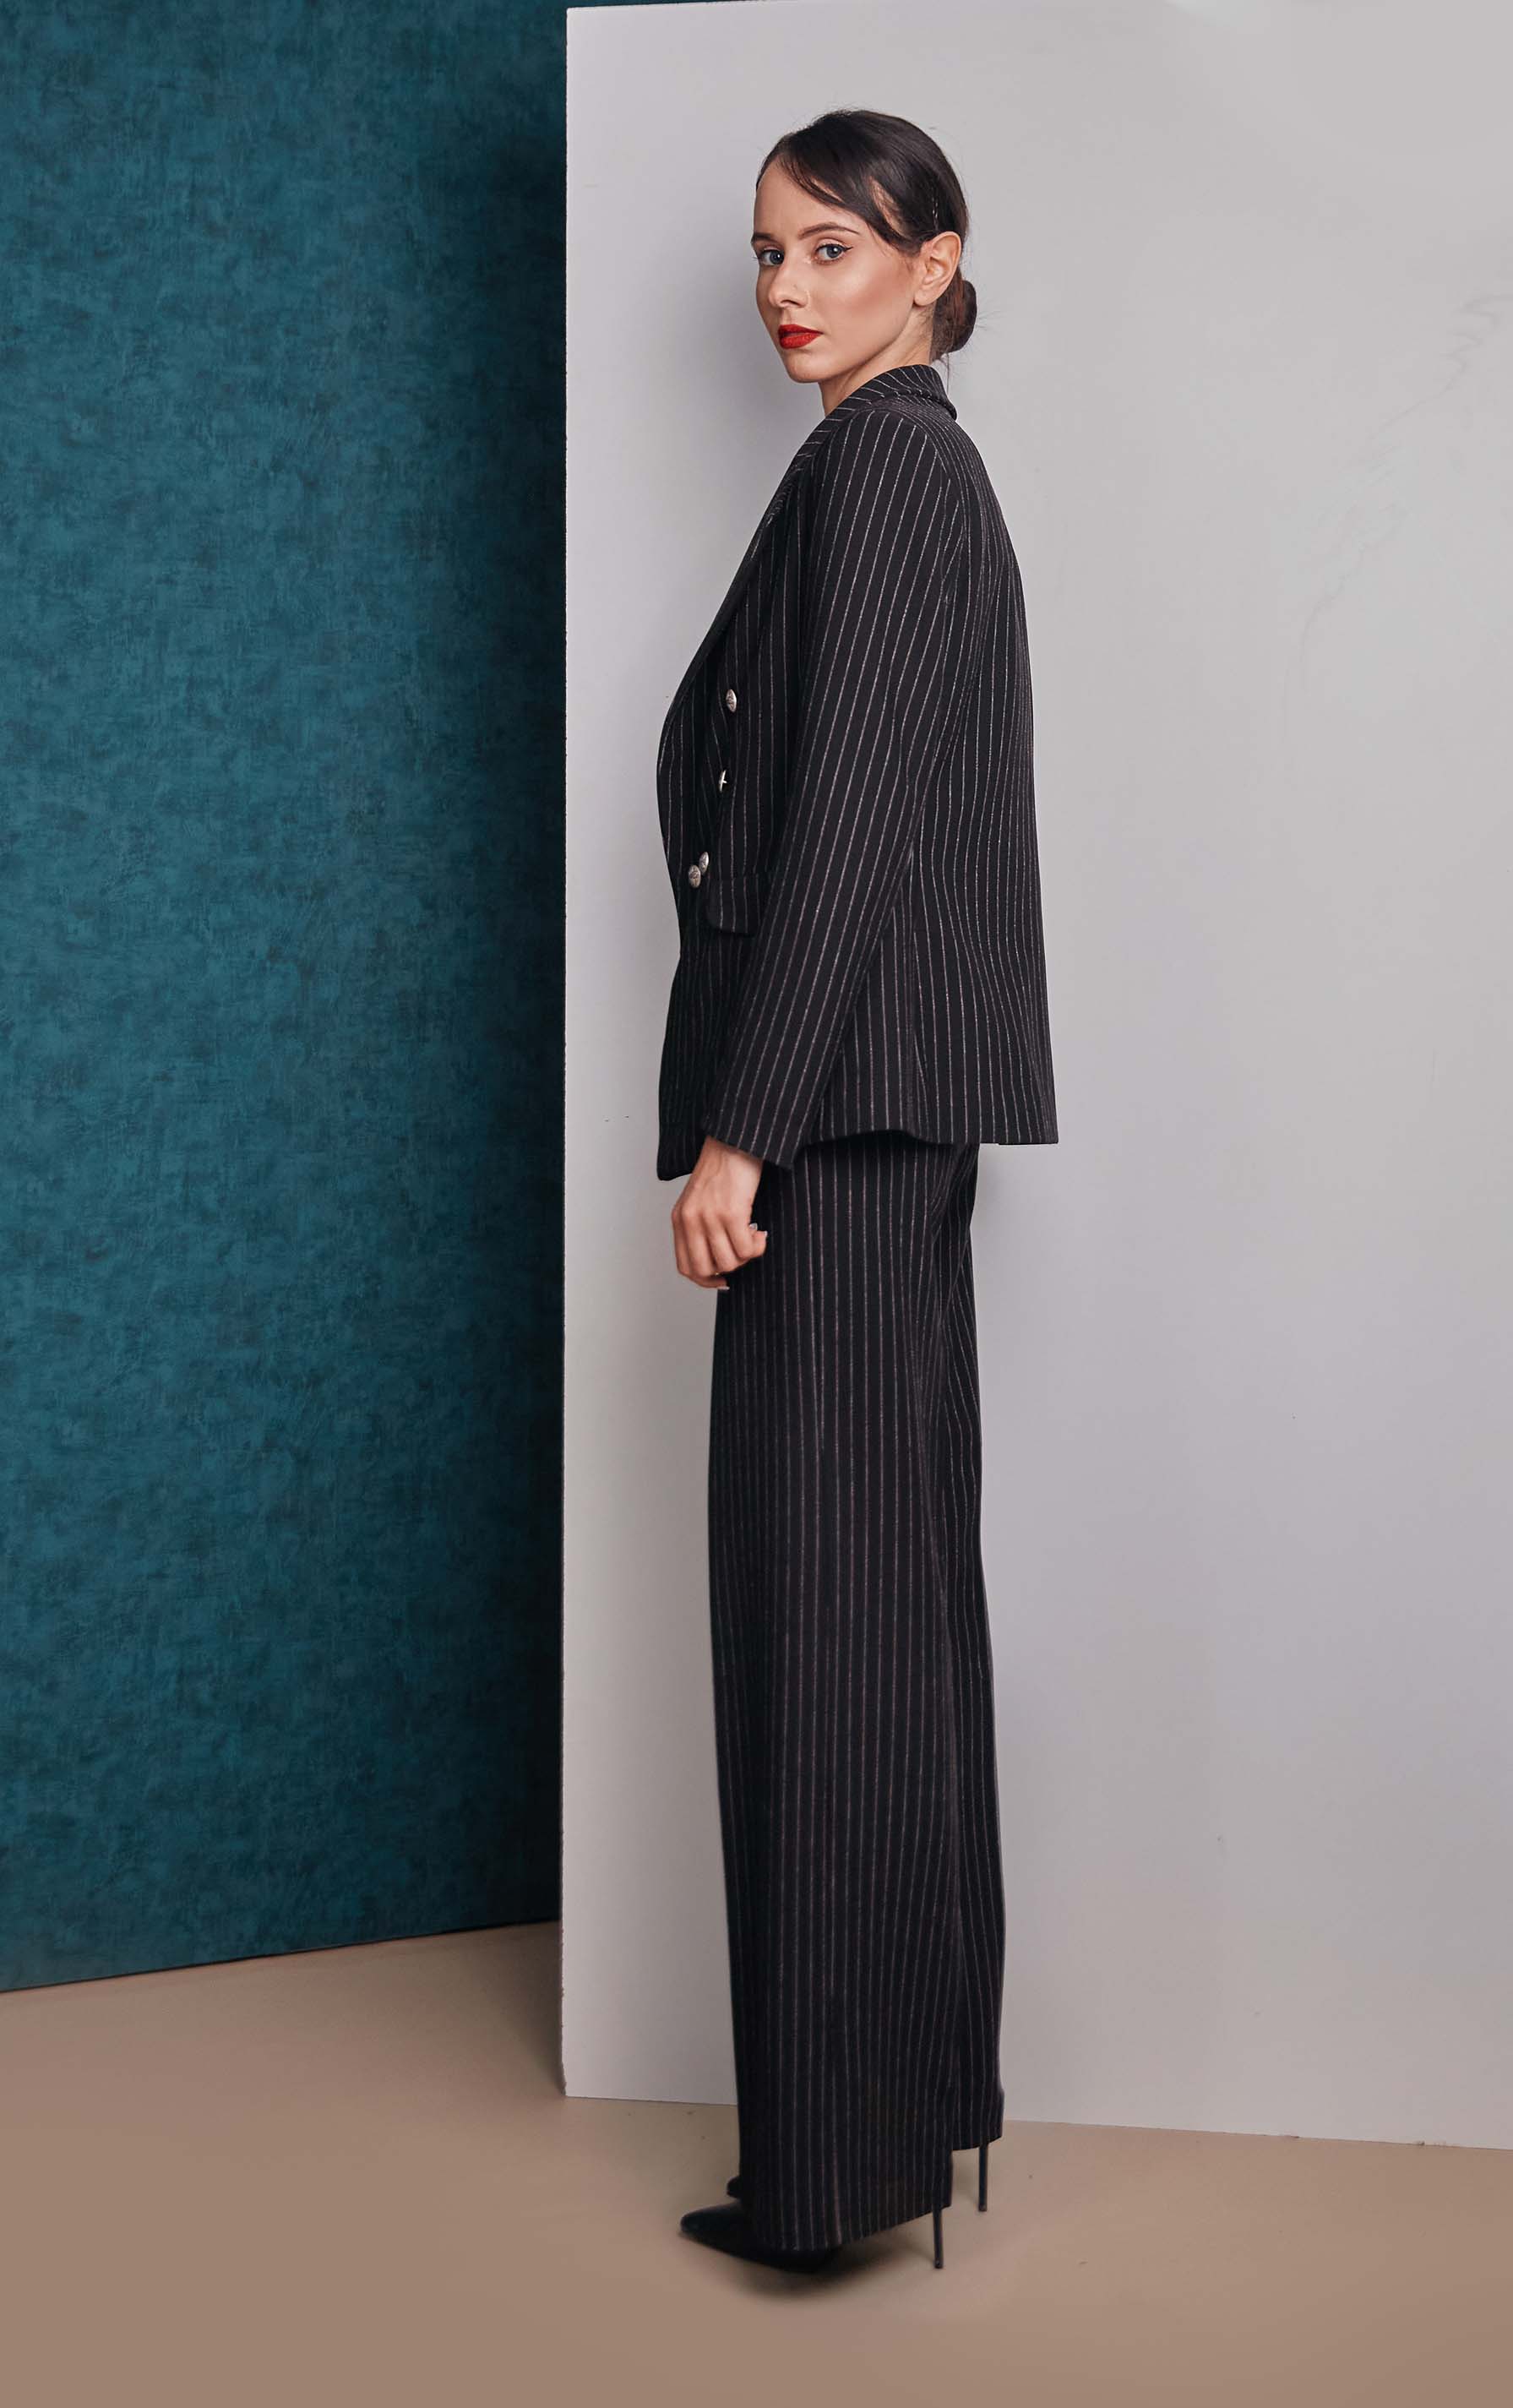 Pinstriped double breasted black blazer and black pant look